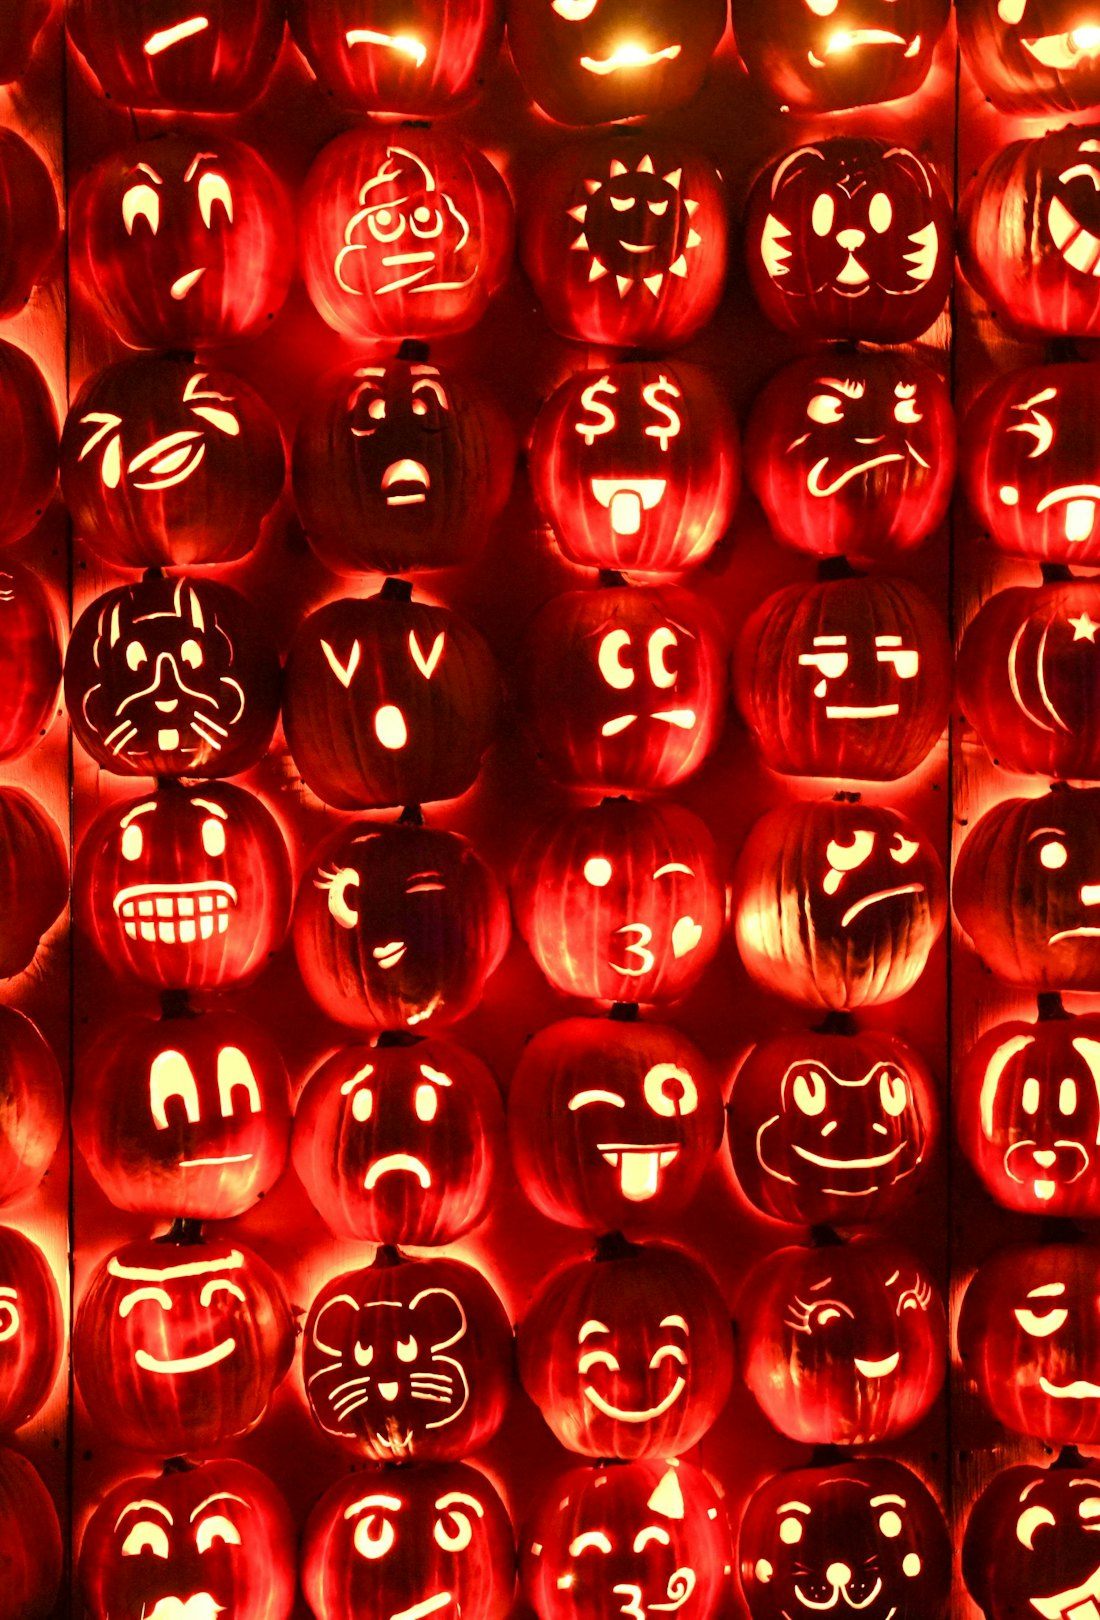 A wall of jack-o'-lanterns with various carvings, demonstrating some of the best jack-o'-lantern ide...